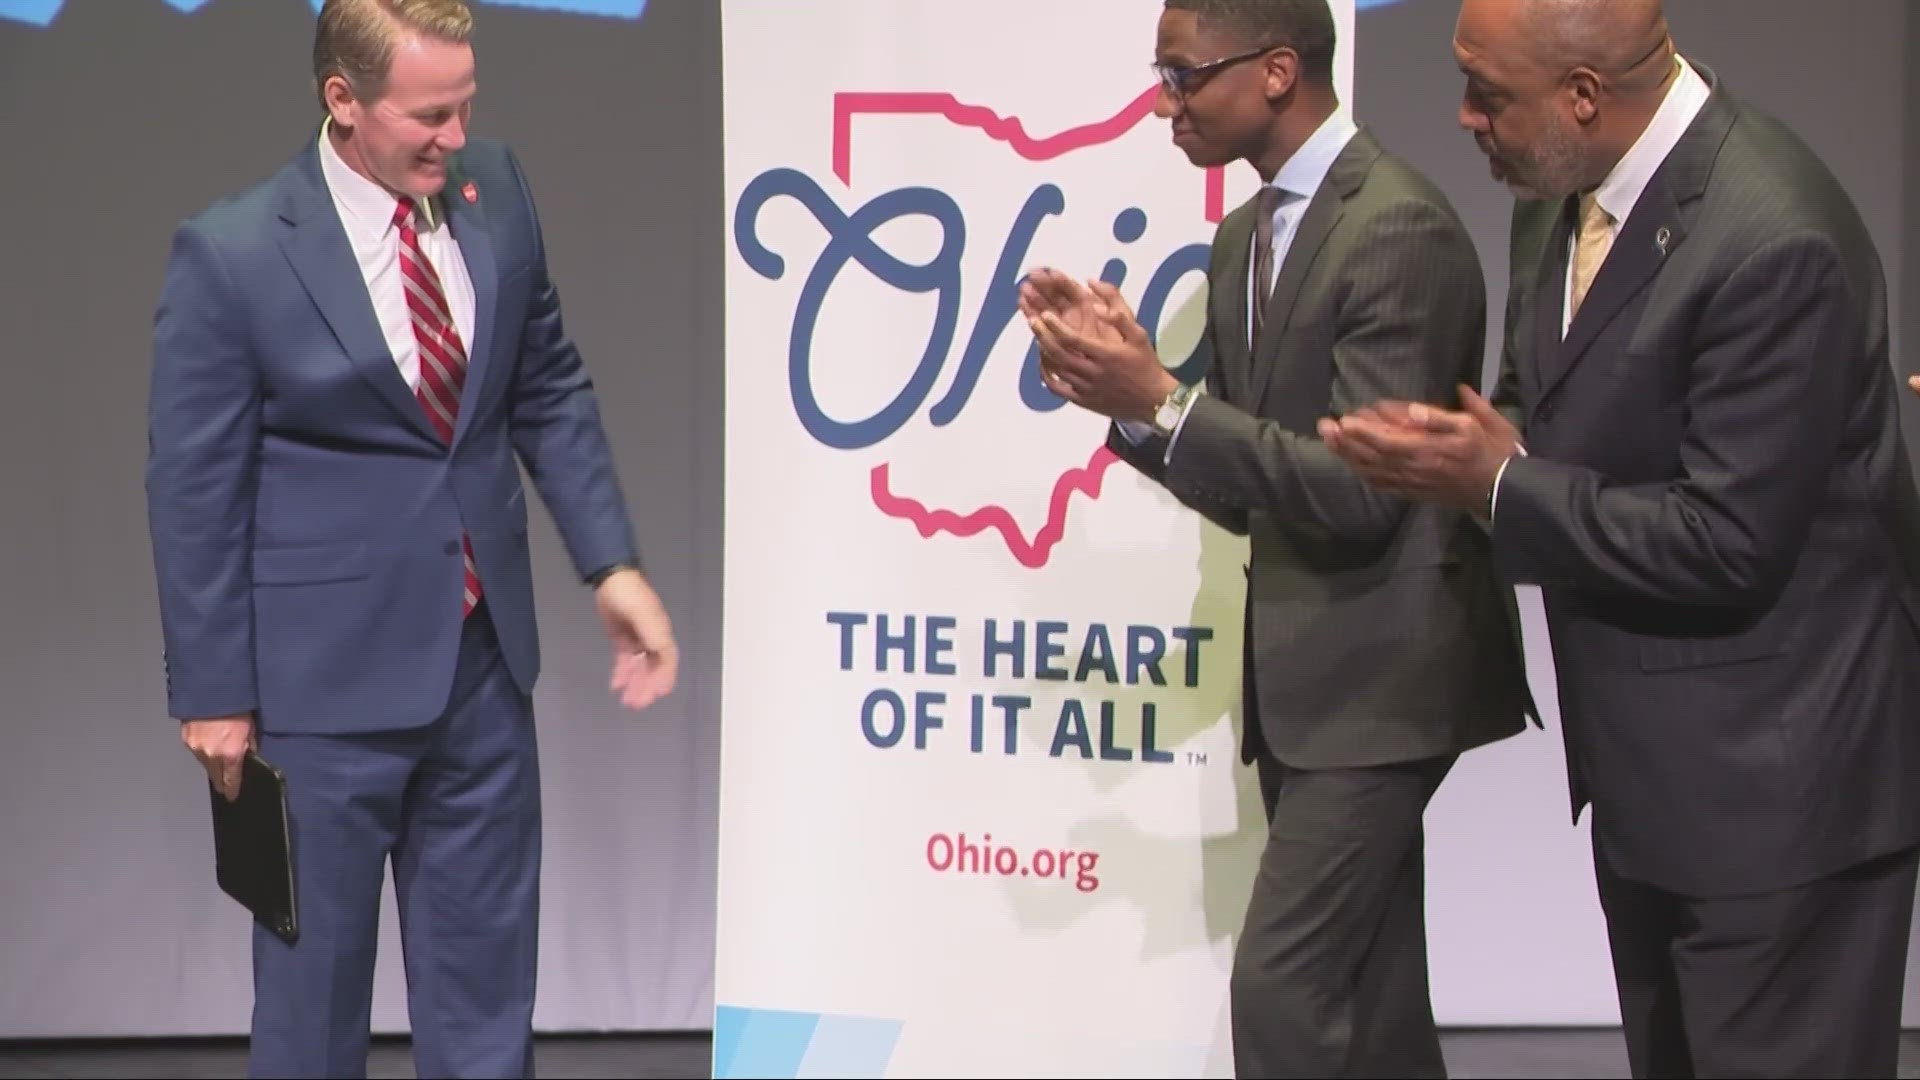 Gov. DeWine announced that the state is returning to 'Ohio, The Heart of it All,' as the state's tourism slogan.